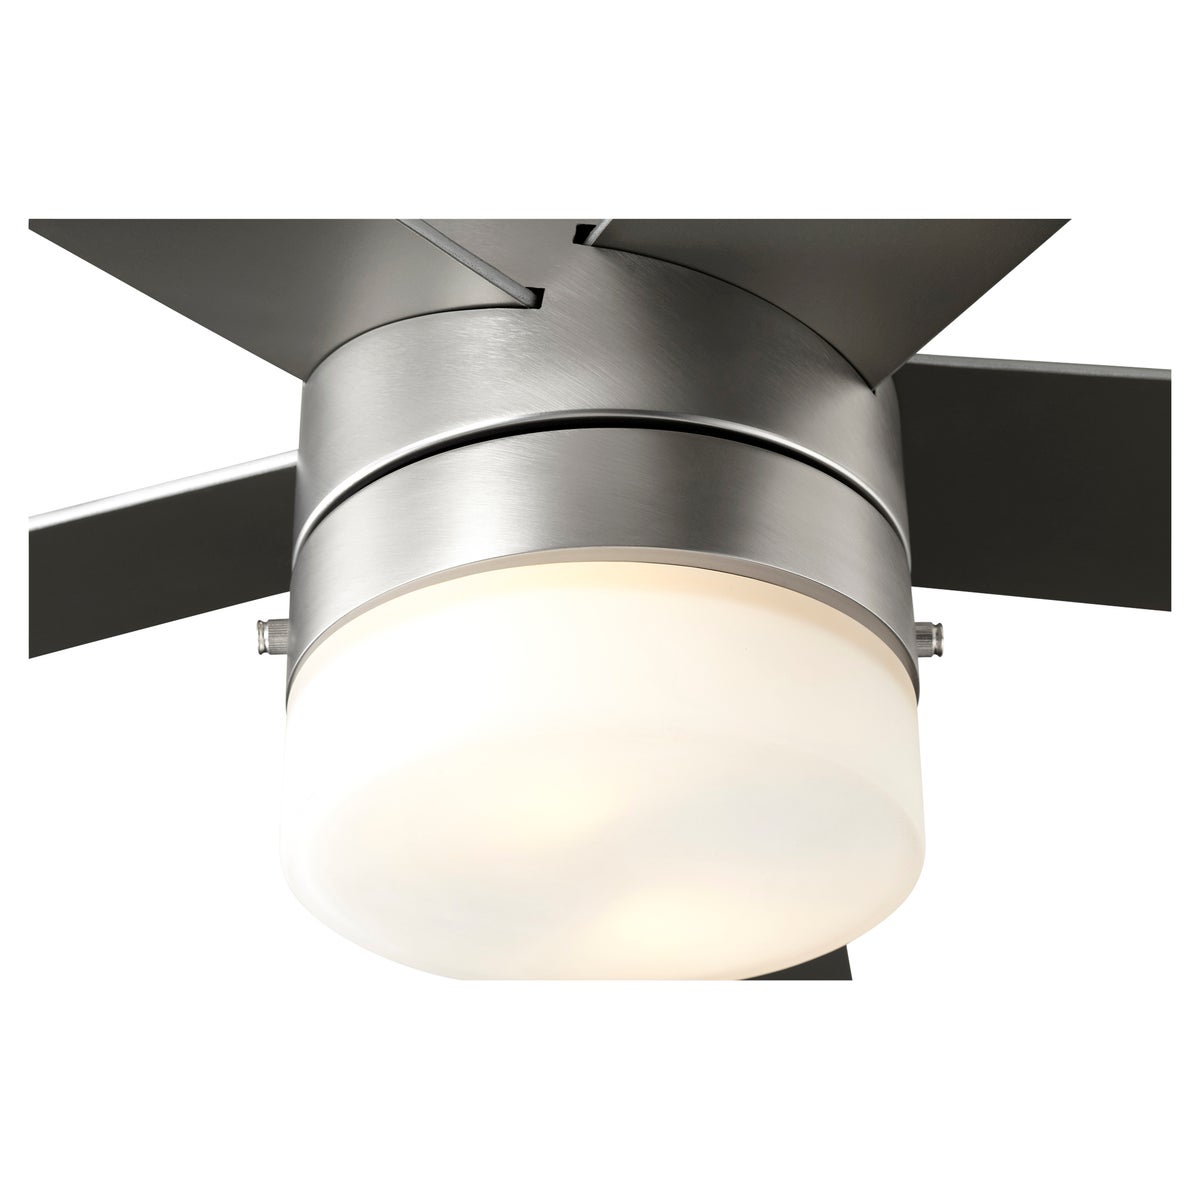 A mid century modern ceiling fan with a light, featuring a clean monochrome finish on the housing, motor, and blades. Effortlessly delivers efficient air circulation with its 52" sweep. Perfect for cooling comfort in any space.